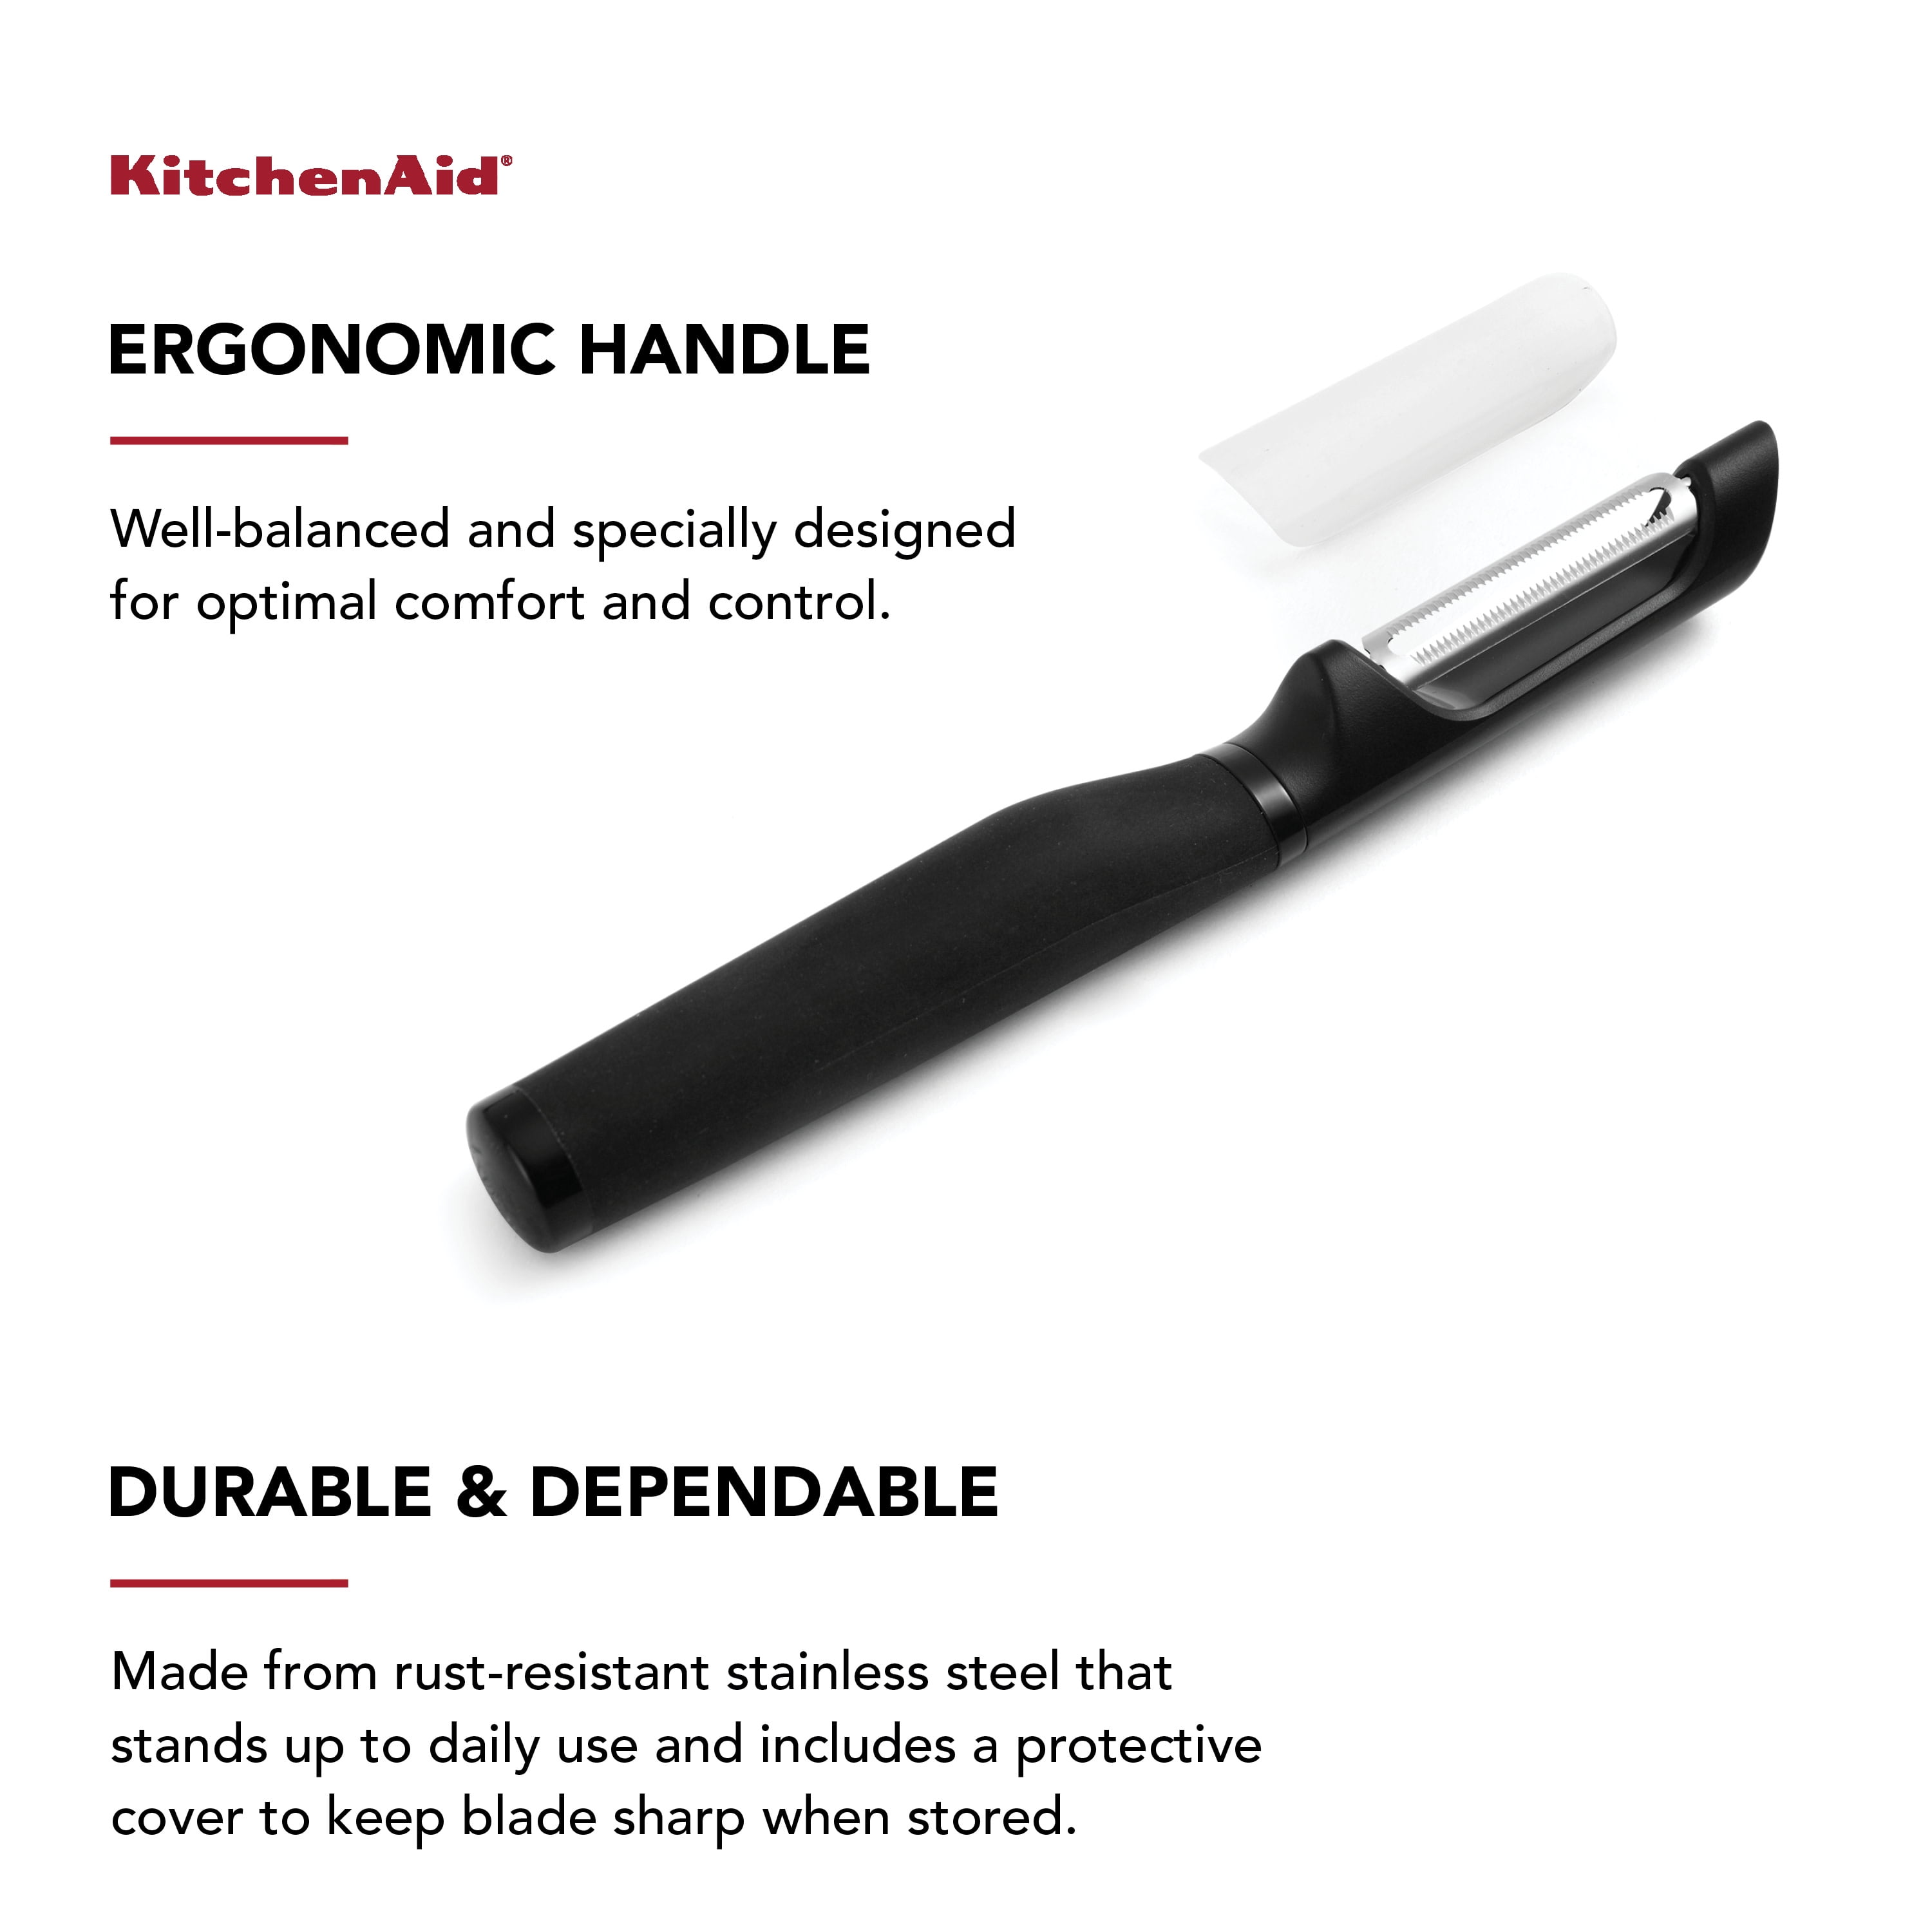 Kitchenaid 1 in x 8.6 in Ultra Sharp Stainless Steel Serrated Blade Euro  Peeler in Black, Dishwasher Safe 